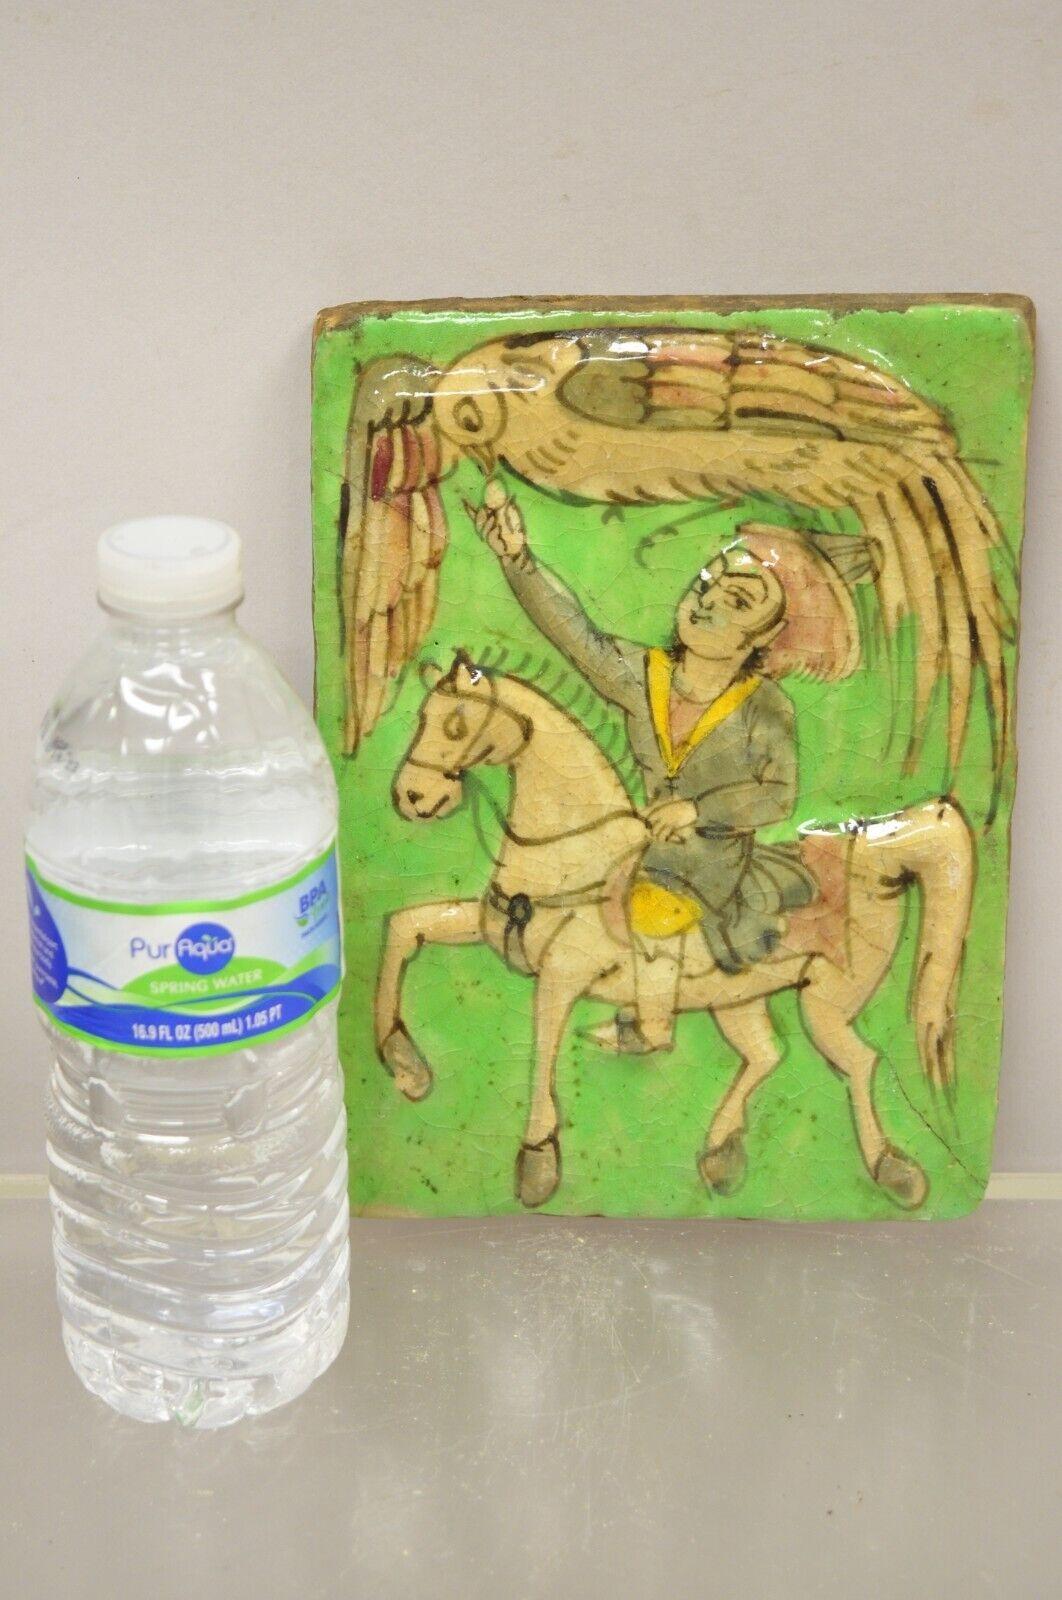 Antique Persian Iznik Qajar Style Green Ceramic Pottery Tile Phoenix Bird and Horse Rider C4. Item features original crackle glazed finish, heavy ceramic pottery construction, very impressive detail, wonderful style and form. Great to mount as wall